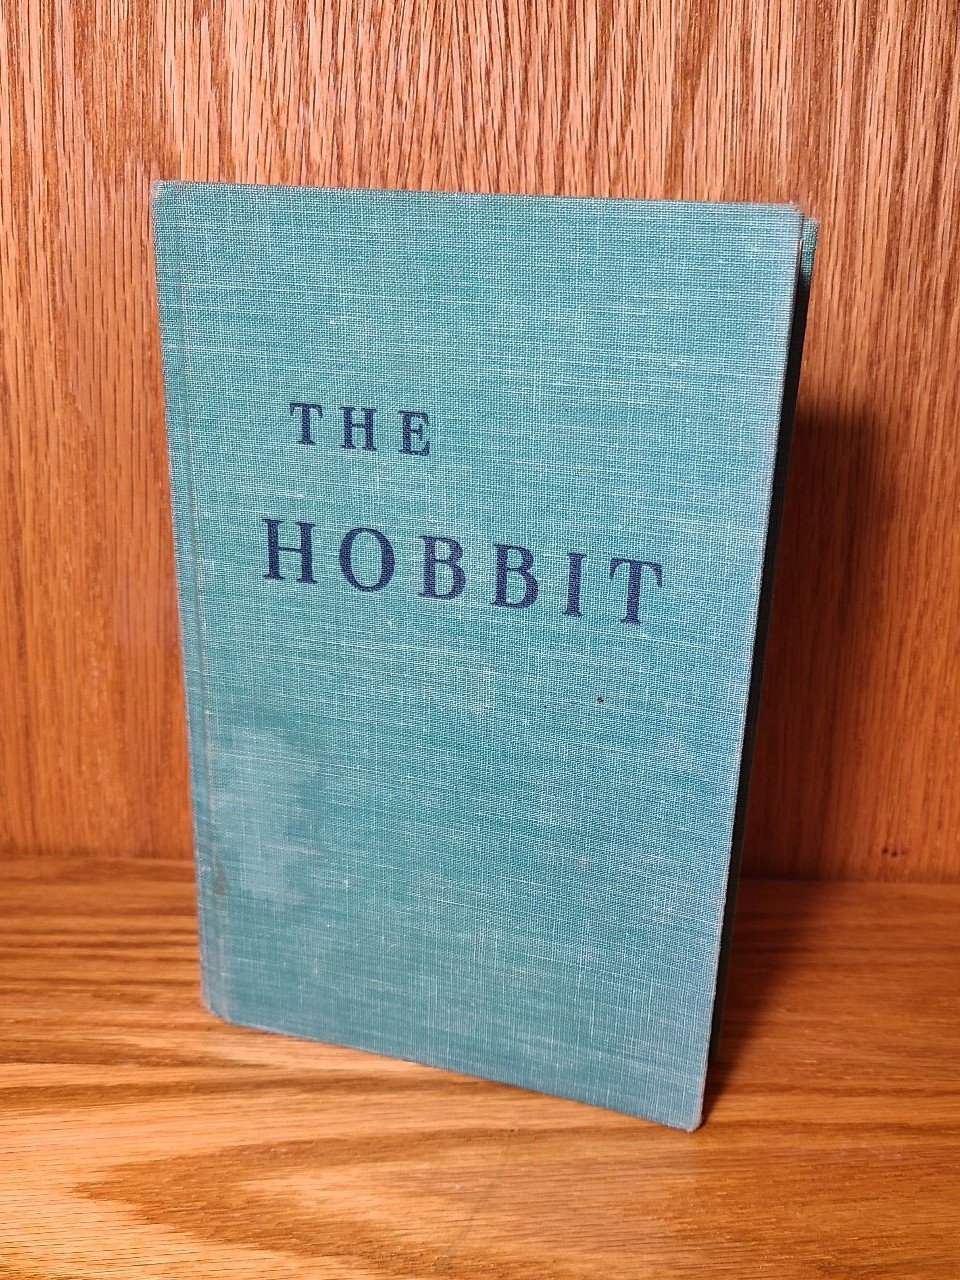 The Hobbit by J.R.R. Tolkien Vintage 1966 printing with illustrations f5gPTGcNV